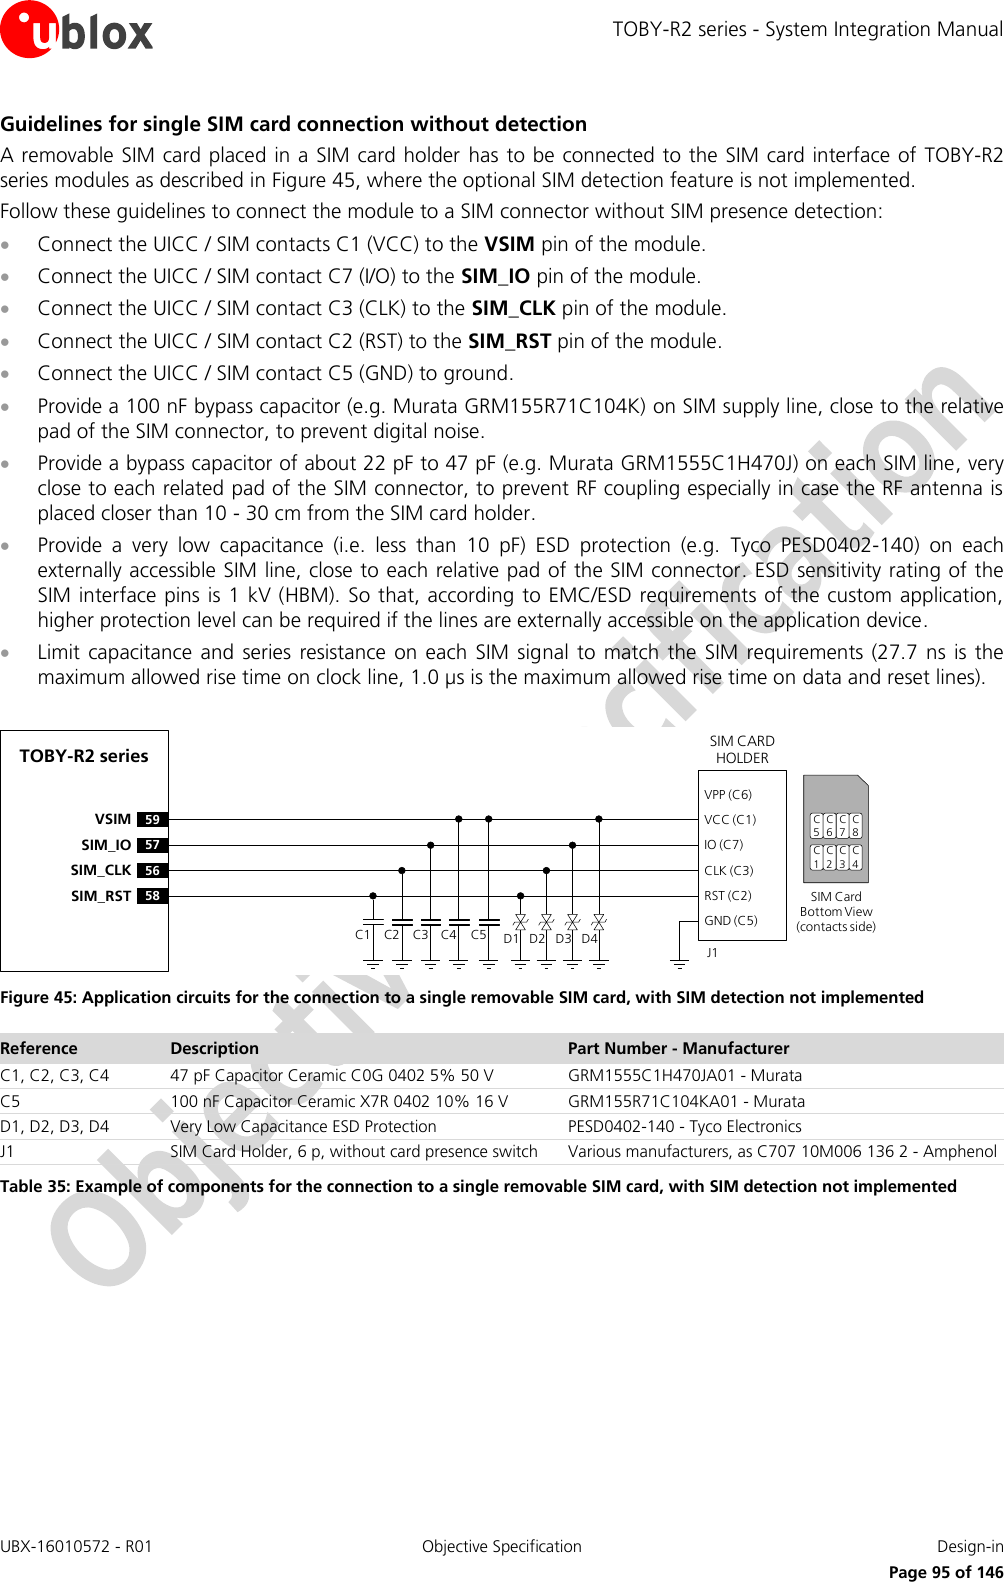 TOBY-R2 series - System Integration Manual UBX-16010572 - R01  Objective Specification  Design-in     Page 95 of 146 Guidelines for single SIM card connection without detection A removable SIM card placed in a SIM card holder  has  to be connected to the SIM card interface of TOBY-R2 series modules as described in Figure 45, where the optional SIM detection feature is not implemented. Follow these guidelines to connect the module to a SIM connector without SIM presence detection:  Connect the UICC / SIM contacts C1 (VCC) to the VSIM pin of the module.  Connect the UICC / SIM contact C7 (I/O) to the SIM_IO pin of the module.  Connect the UICC / SIM contact C3 (CLK) to the SIM_CLK pin of the module.  Connect the UICC / SIM contact C2 (RST) to the SIM_RST pin of the module.  Connect the UICC / SIM contact C5 (GND) to ground.  Provide a 100 nF bypass capacitor (e.g. Murata GRM155R71C104K) on SIM supply line, close to the relative pad of the SIM connector, to prevent digital noise.  Provide a bypass capacitor of about 22 pF to 47 pF (e.g. Murata GRM1555C1H470J) on each SIM line, very close to each related pad of the SIM connector, to prevent RF coupling especially in case the RF antenna is placed closer than 10 - 30 cm from the SIM card holder.  Provide  a  very  low  capacitance  (i.e.  less  than  10  pF)  ESD  protection  (e.g.  Tyco  PESD0402-140)  on  each externally accessible SIM line, close to each relative pad of the SIM connector. ESD sensitivity rating of the SIM interface pins is 1 kV (HBM). So that, according to EMC/ESD requirements of the custom application, higher protection level can be required if the lines are externally accessible on the application device.  Limit capacitance  and  series resistance  on each  SIM  signal  to  match the  SIM requirements  (27.7 ns  is the maximum allowed rise time on clock line, 1.0 µs is the maximum allowed rise time on data and reset lines).  TOBY-R2 series59VSIM57SIM_IO56SIM_CLK58SIM_RSTSIM CARD HOLDERC5C6C7C1C2C3SIM Card Bottom View (contacts side)C1VPP (C6)VCC (C1)IO (C7)CLK (C3)RST (C2)GND (C5)C2 C3 C5J1C4 D1 D2 D3 D4C8C4 Figure 45: Application circuits for the connection to a single removable SIM card, with SIM detection not implemented Reference Description Part Number - Manufacturer C1, C2, C3, C4 47 pF Capacitor Ceramic C0G 0402 5% 50 V GRM1555C1H470JA01 - Murata C5 100 nF Capacitor Ceramic X7R 0402 10% 16 V GRM155R71C104KA01 - Murata D1, D2, D3, D4 Very Low Capacitance ESD Protection PESD0402-140 - Tyco Electronics  J1 SIM Card Holder, 6 p, without card presence switch Various manufacturers, as C707 10M006 136 2 - Amphenol Table 35: Example of components for the connection to a single removable SIM card, with SIM detection not implemented  